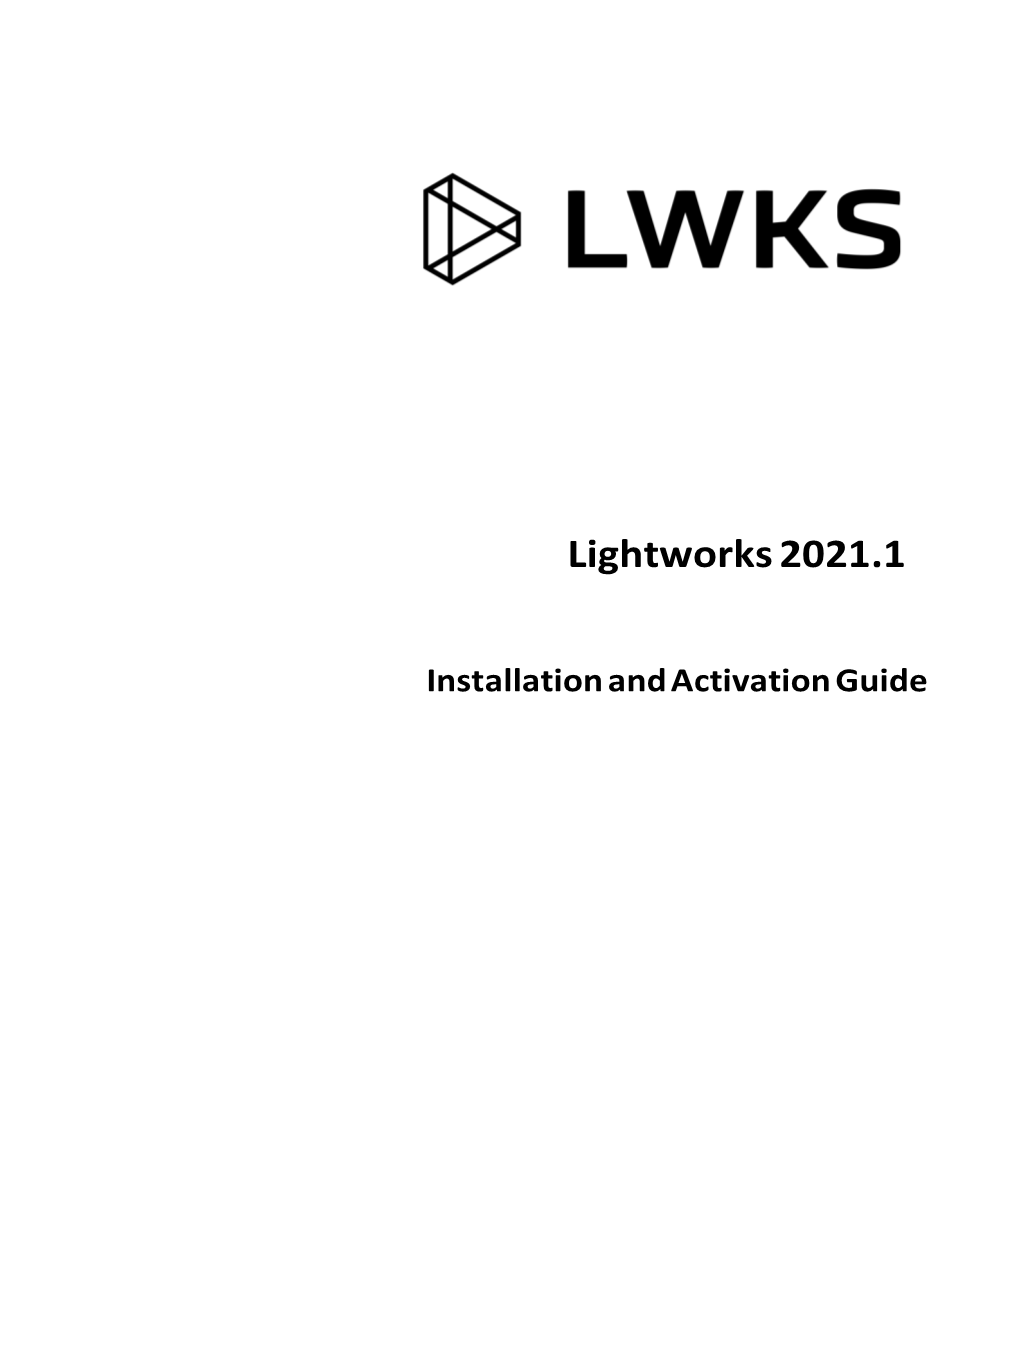 Installation and Activation Guide